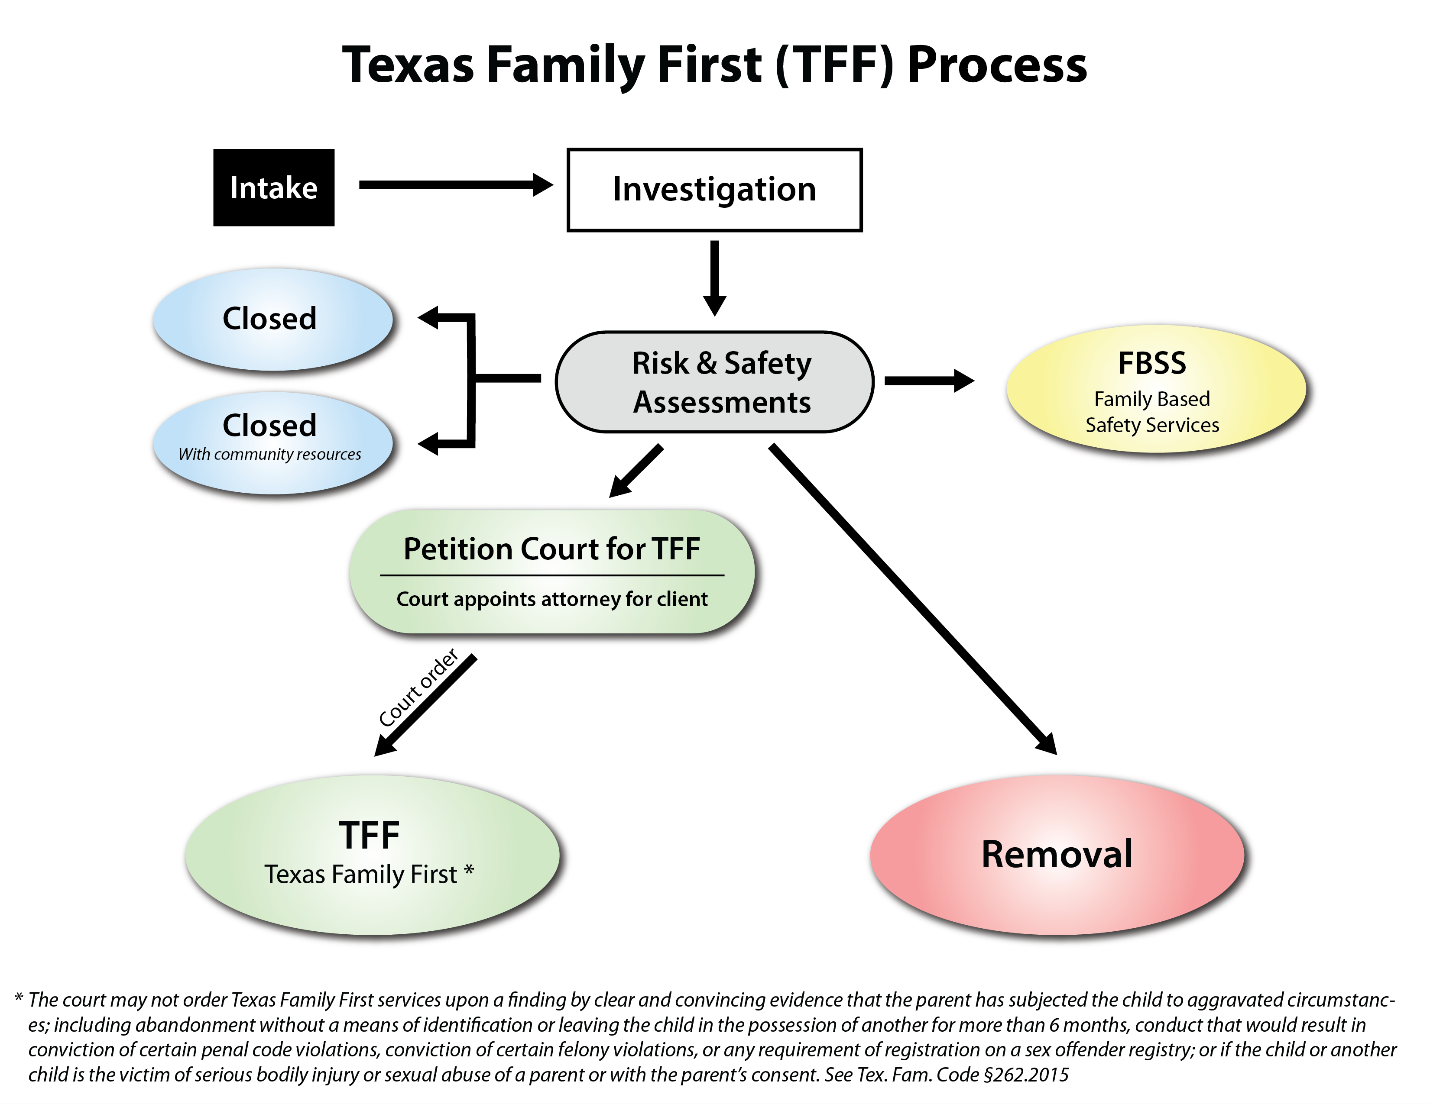 TFF Process Diagram: Intakes go to Investigations, which then lead to risk & safety asessments as described above.